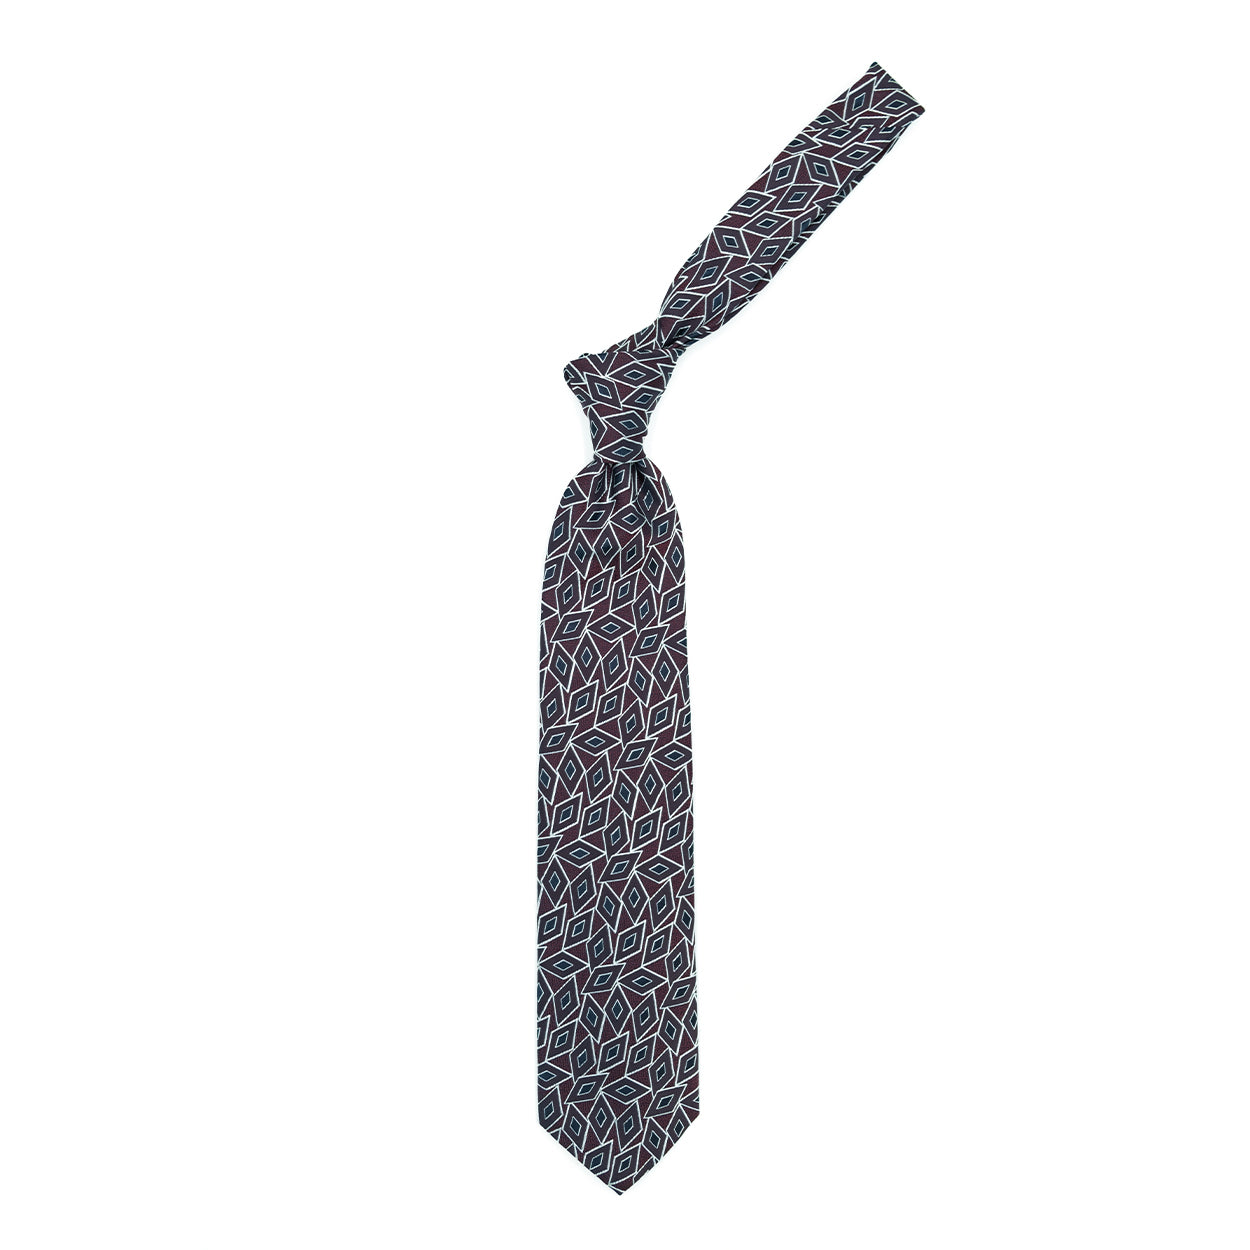 Bordeaux tie with burgundy and blue diamonds